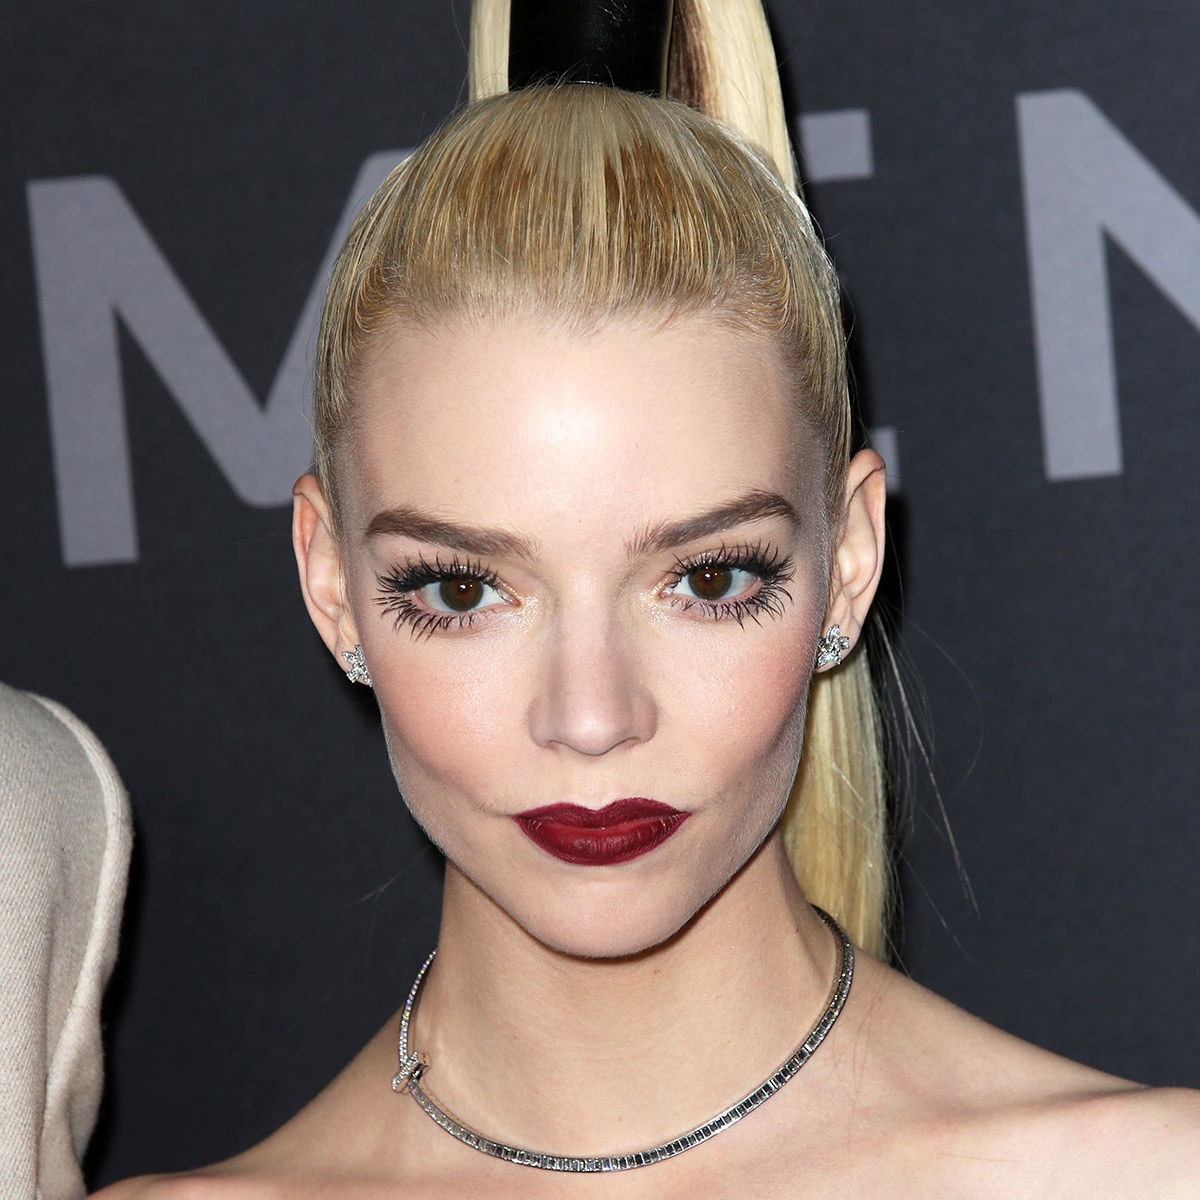 Anya Taylor-Joy Goes From A Sheer Goth Dress To A Barbiecore Mini On ‘The Menu’ Tour—She Looks Amazing In Both!